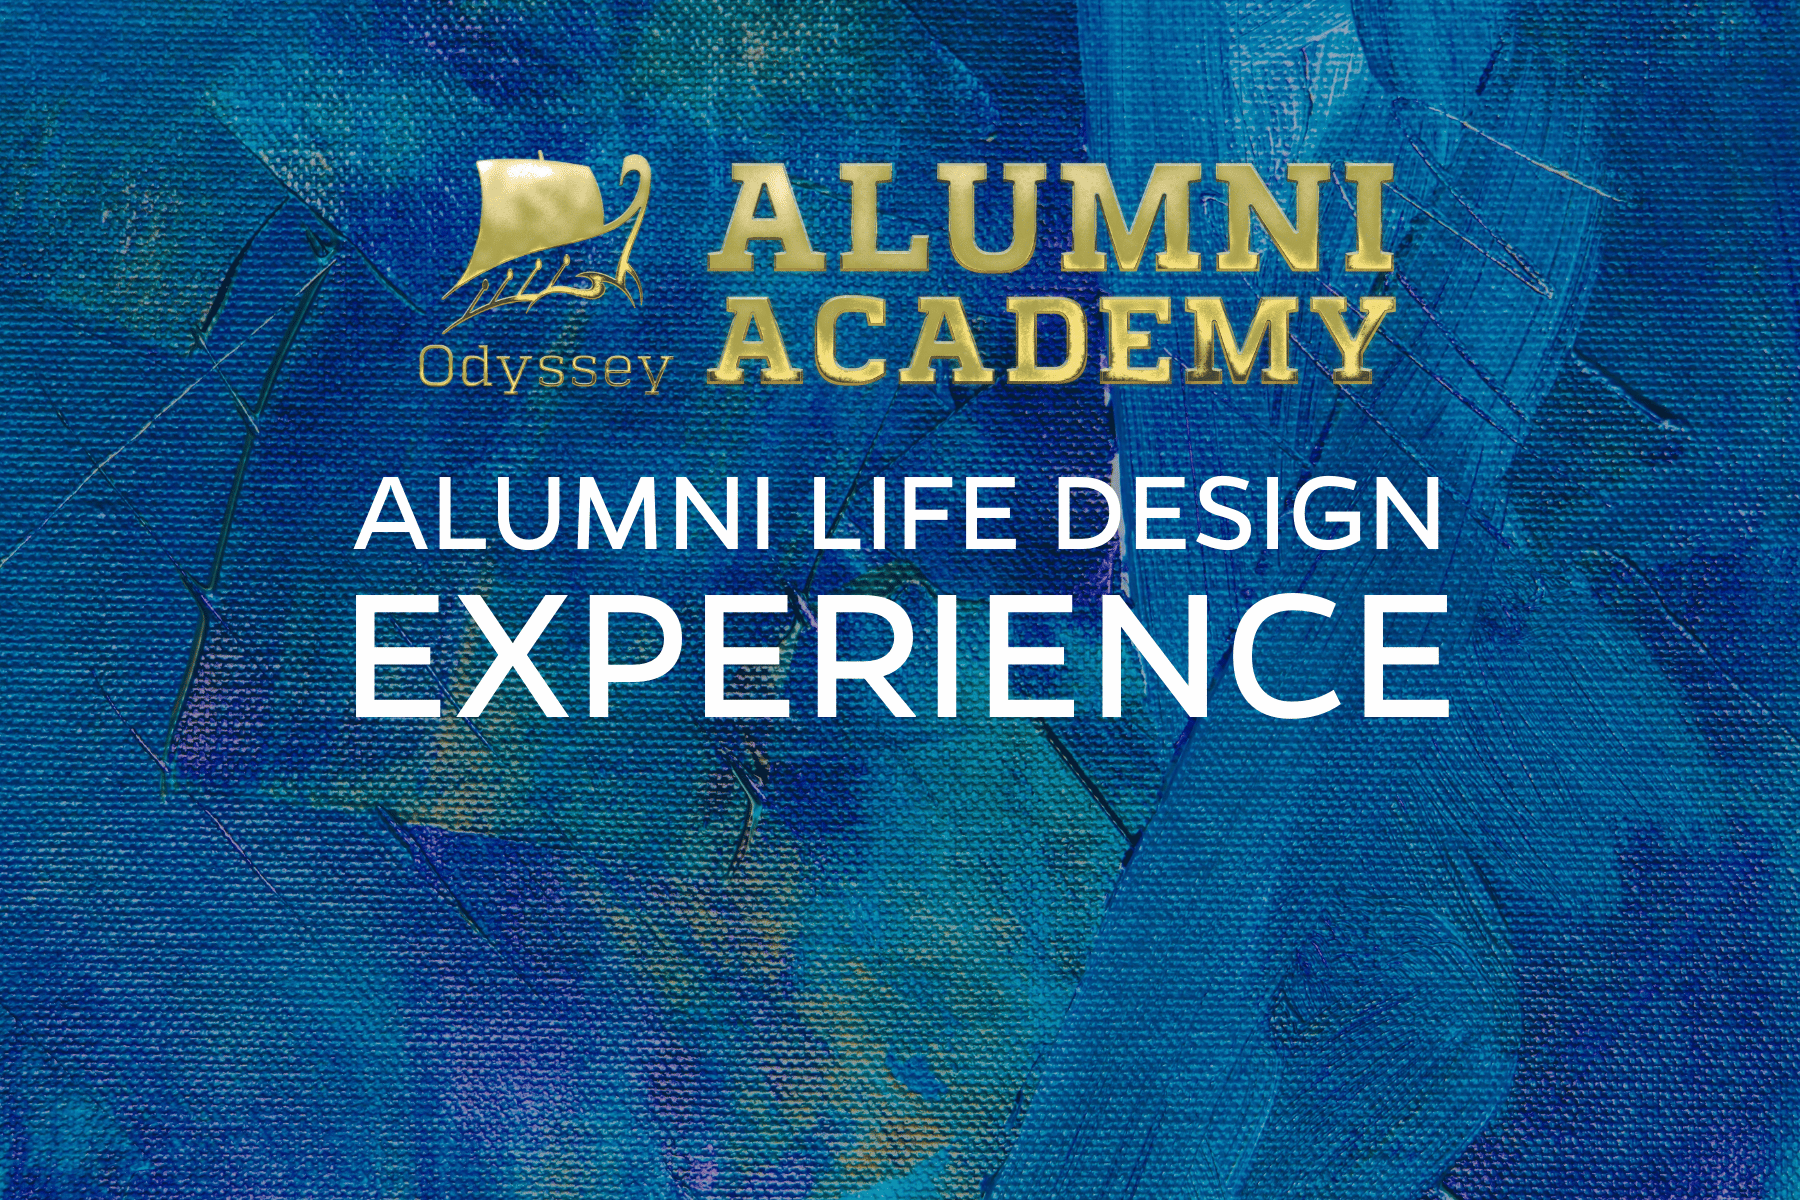 Grow professionally through the Alumni Life Design Experience Featured Image